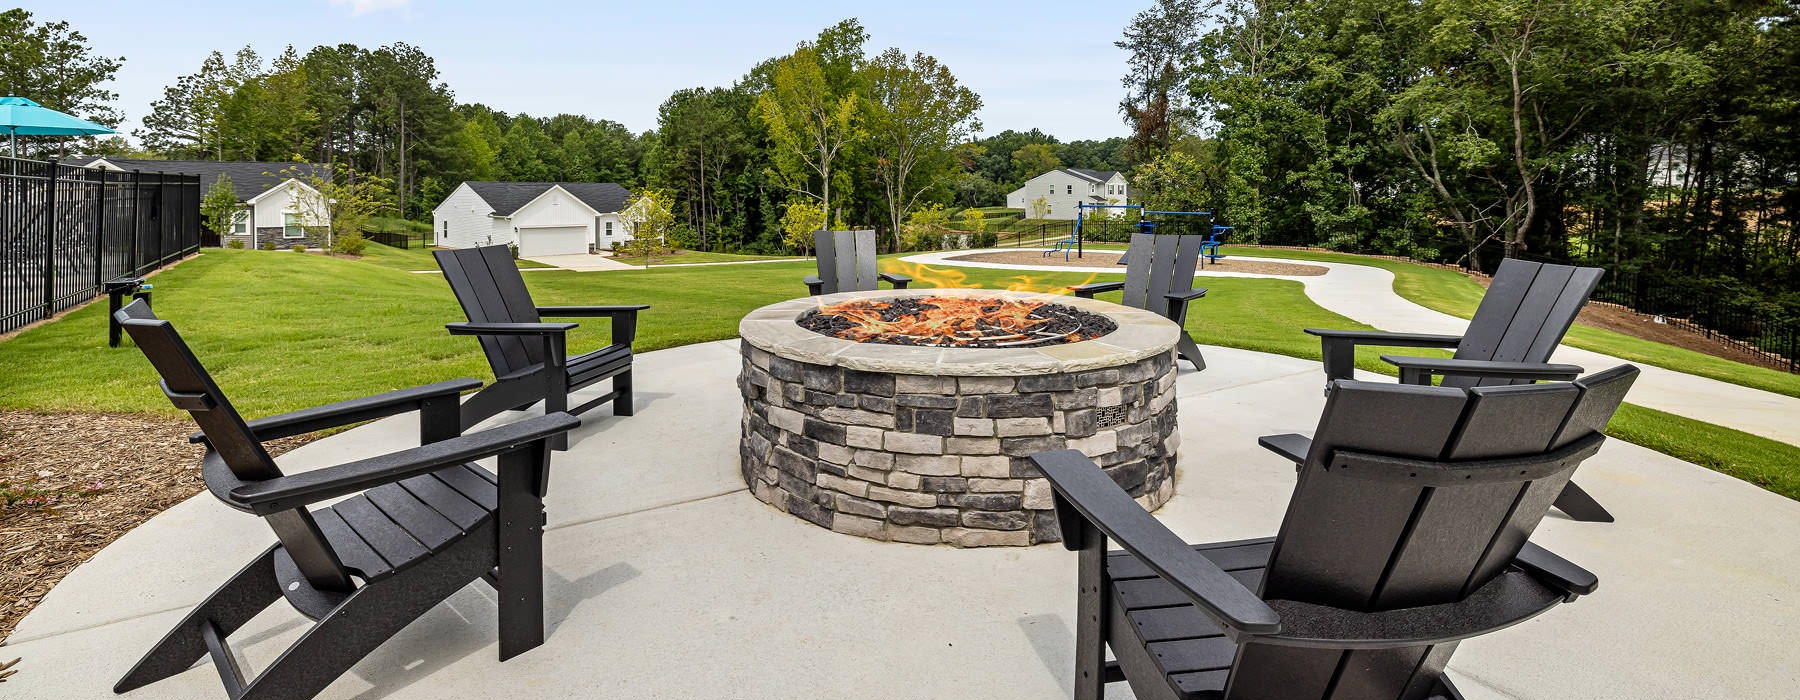 lawn chairs around outdoor fire pit